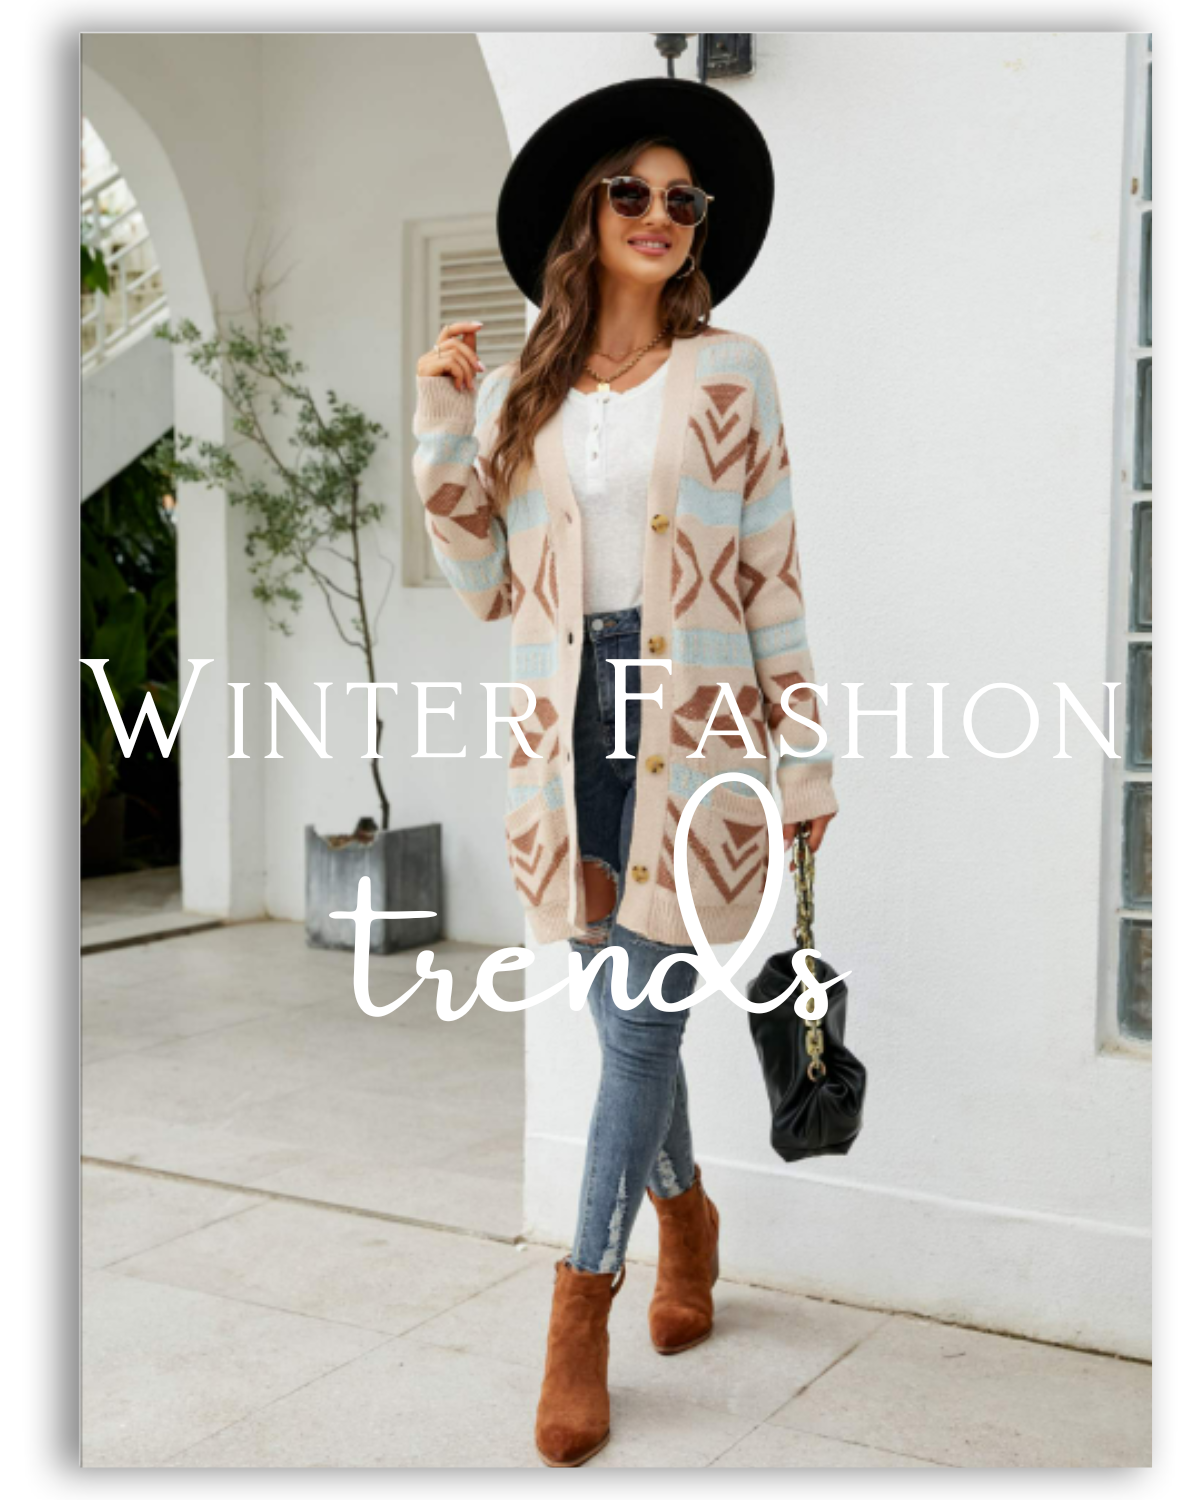 Winter fashion trends for Boutiques